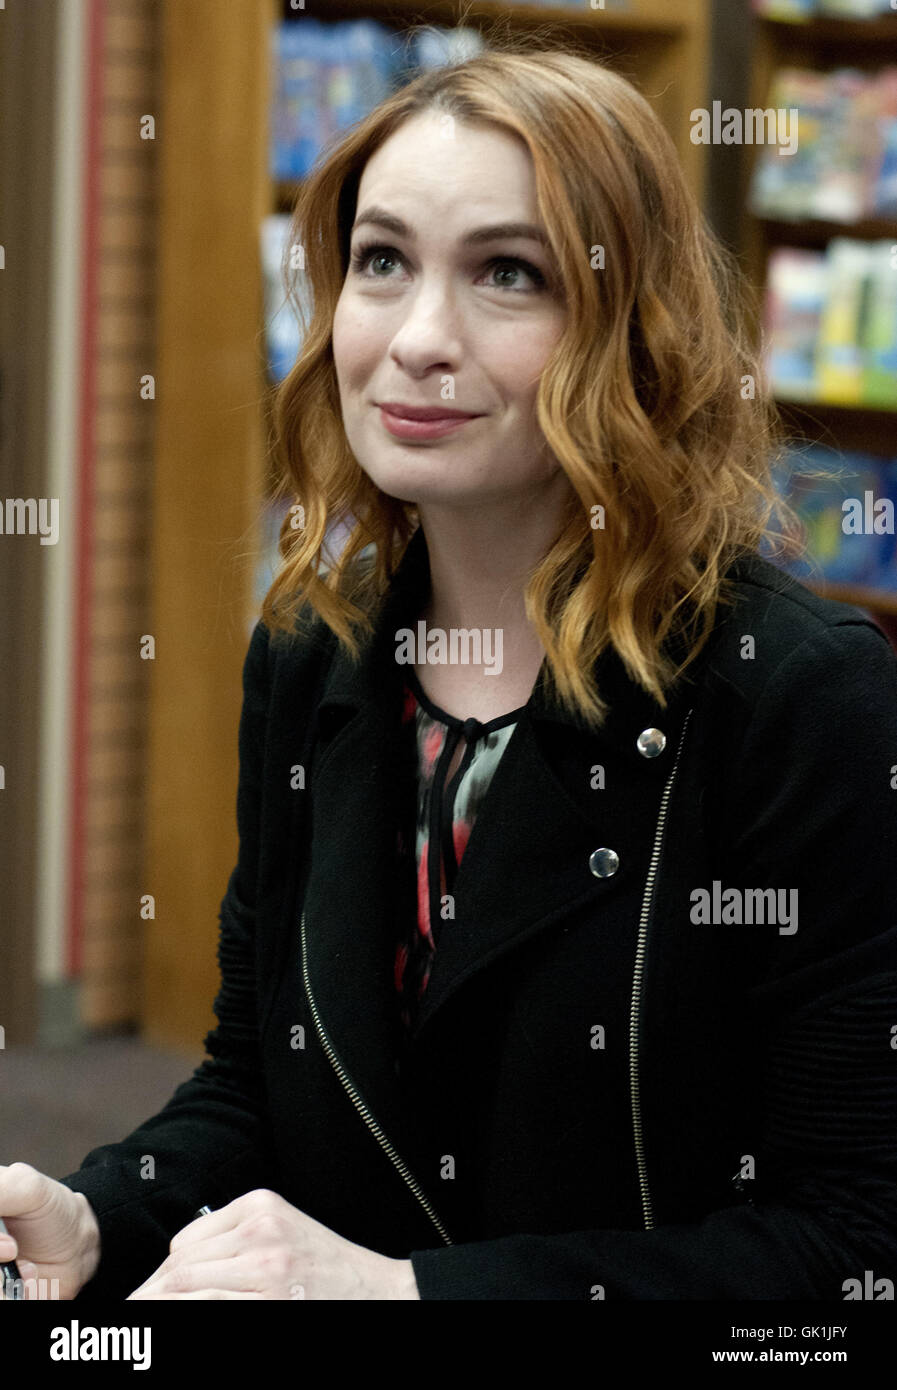 Felicia Day book signing for 'You're Never Weird On the Internet (Almost)' at Anderson's Bookshop  Featuring: Felicia Day Where: Naperville, Illinois, United States When: 23 Apr 2016 Stock Photo